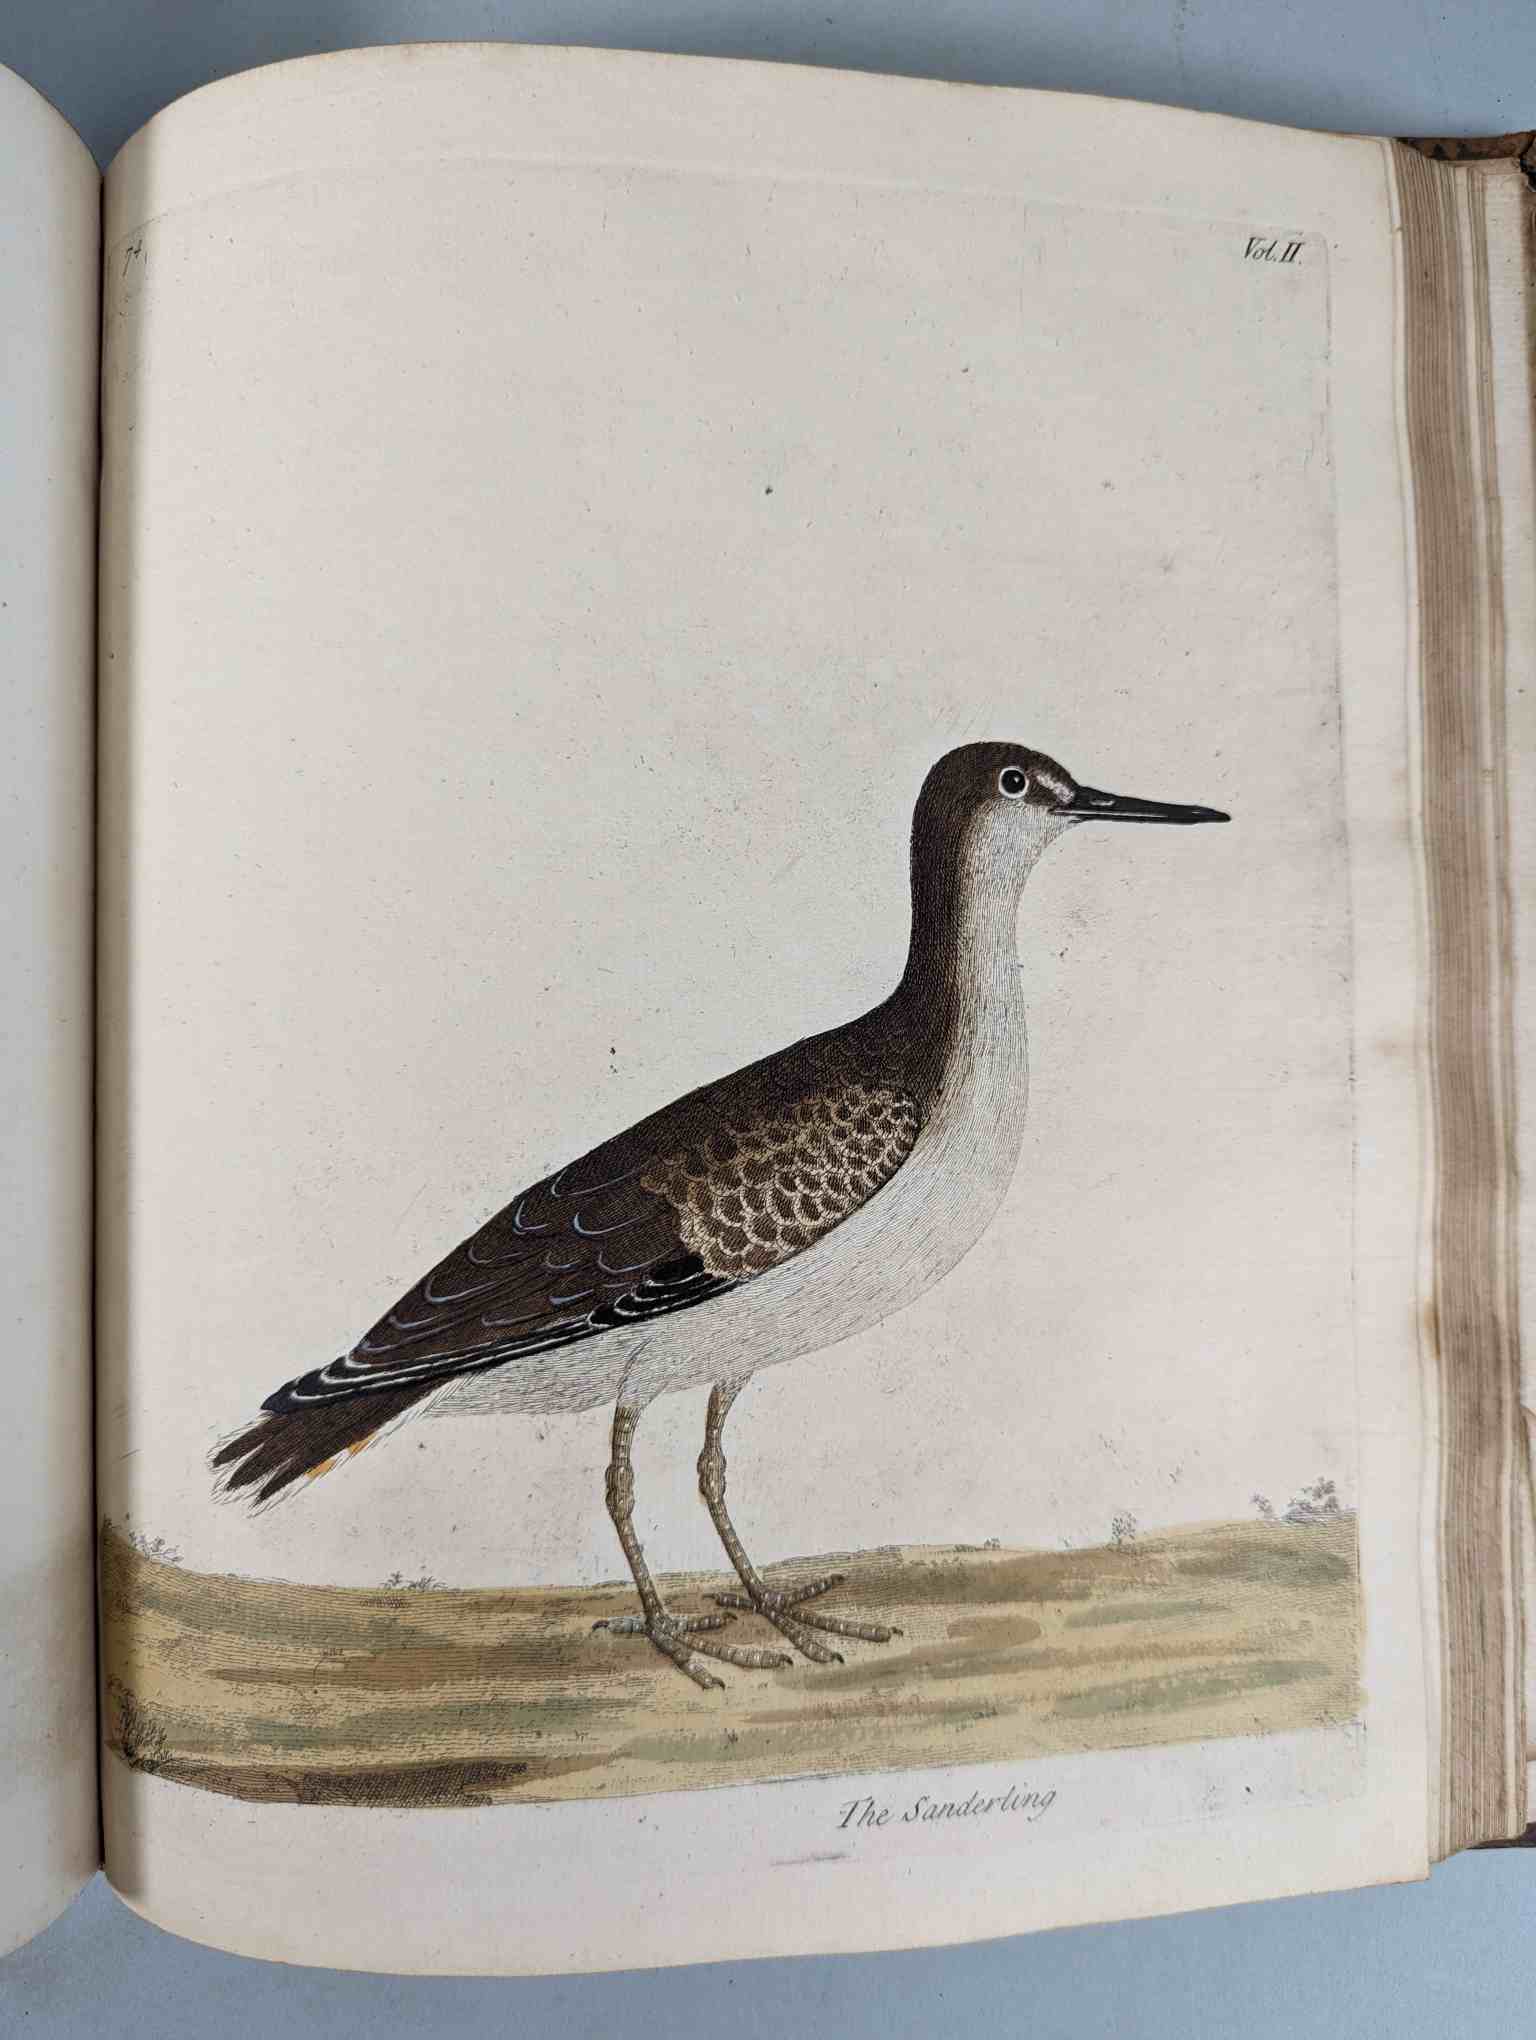 ALBIN, Eleazar. A Natural History of Birds, to which are added, Notes and Observations by W. - Image 178 of 208